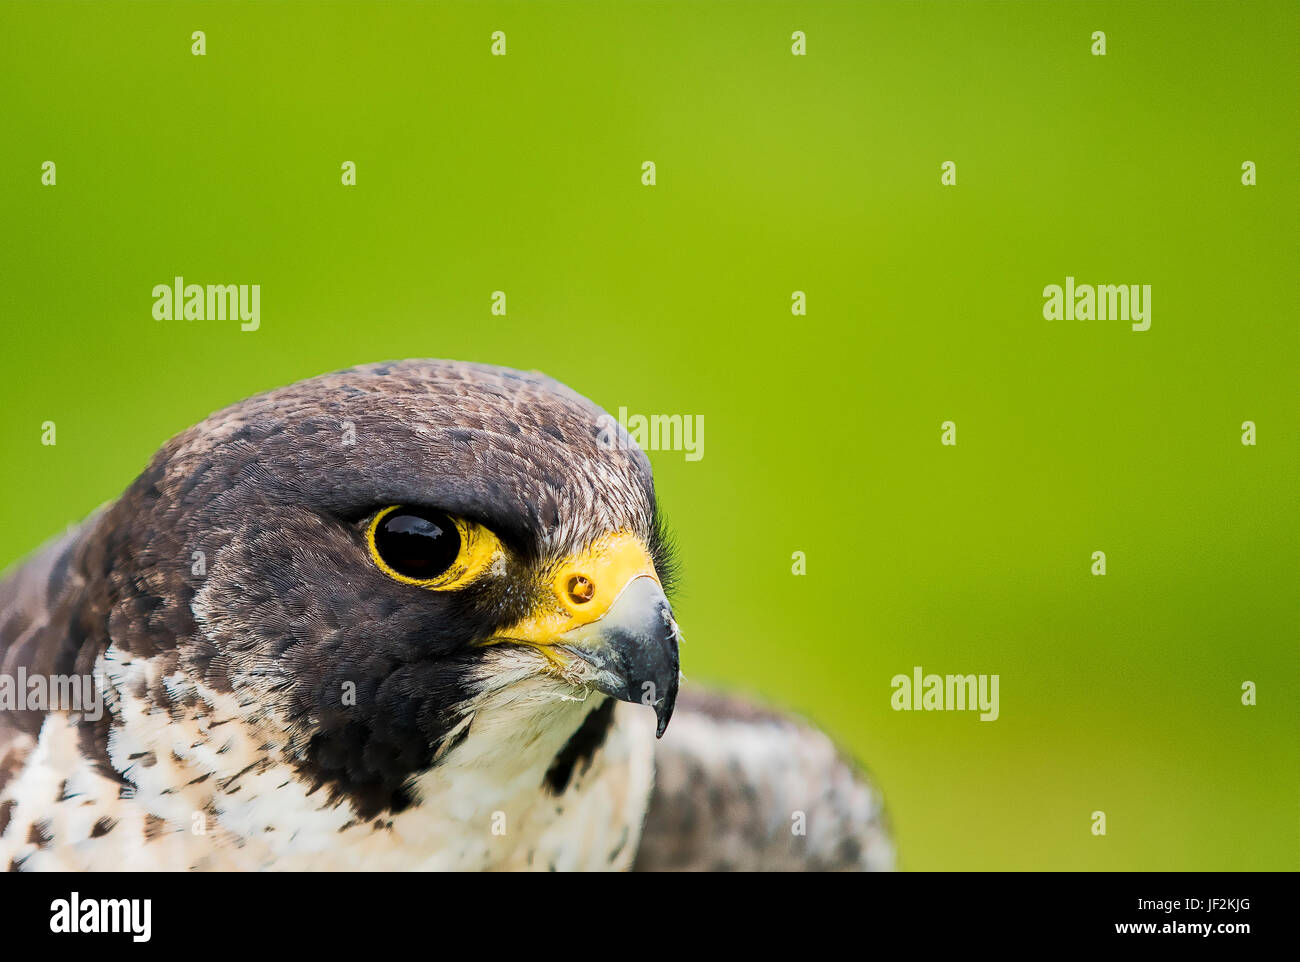 A Portrait of a Peregrine Falcon with a green Background Stock Photo